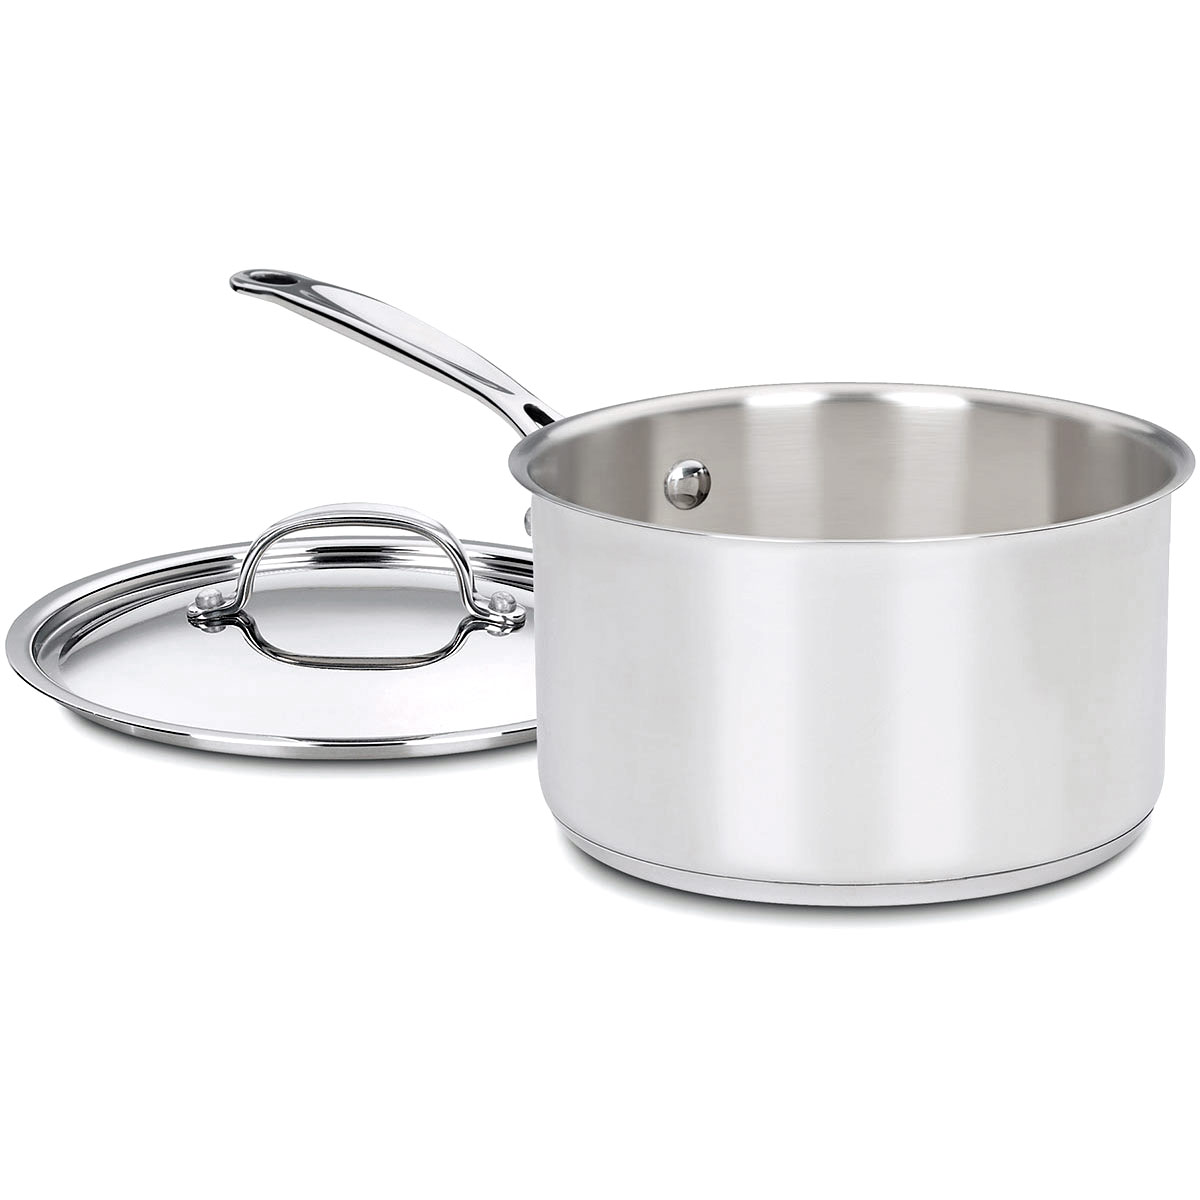 Cuisinart Chef'S Classic Stainless Steel 3 Qt. Saucepan W/Cover - Metallic  Red 